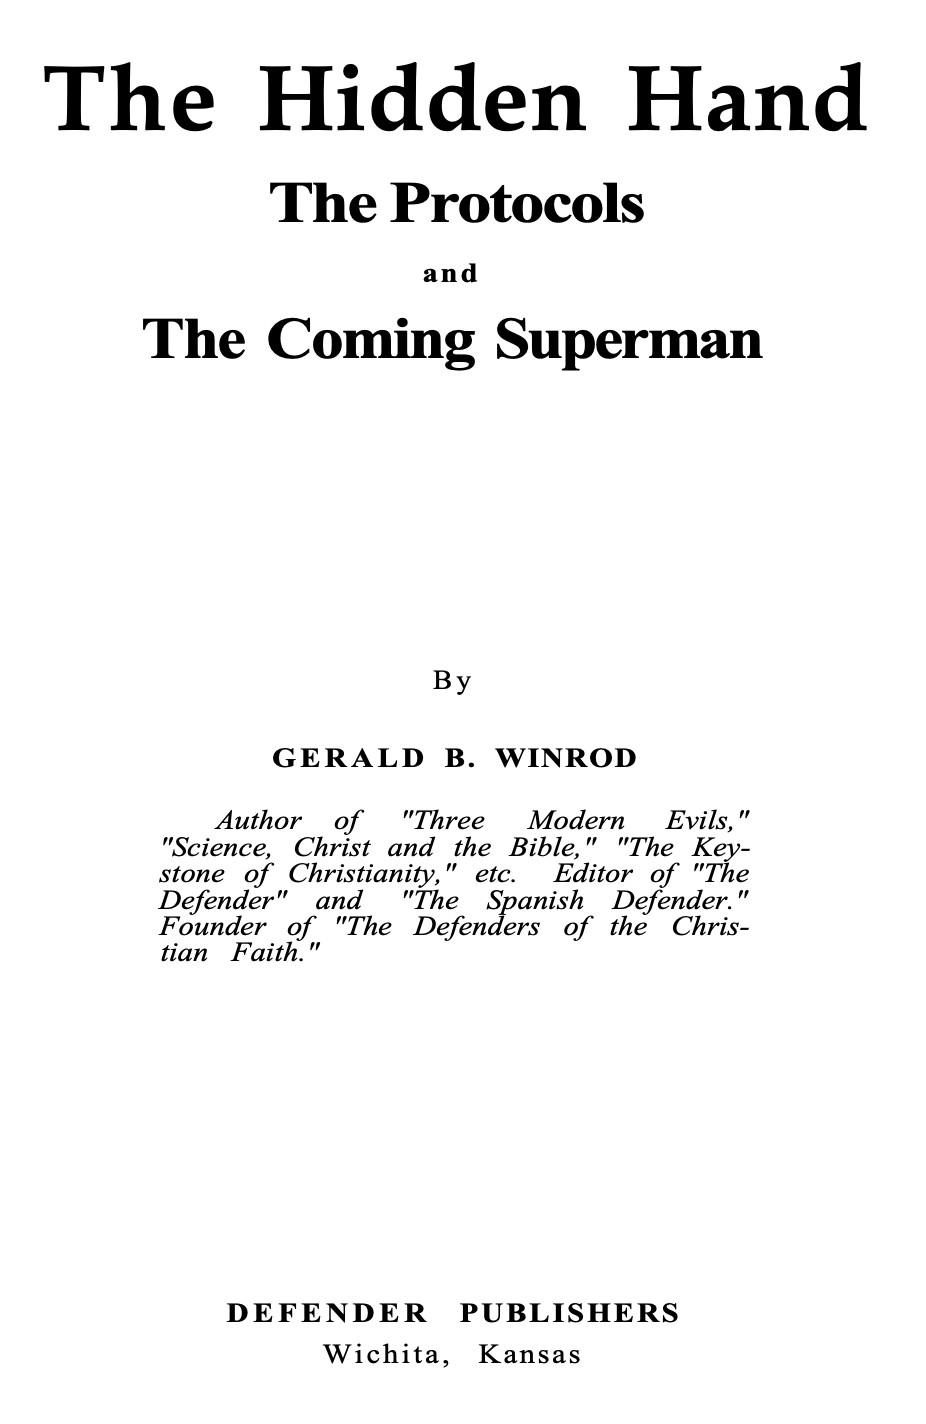 The Hidden Hand: The Protocols and the Coming Superman (1933) by Gerald Burton Winrod